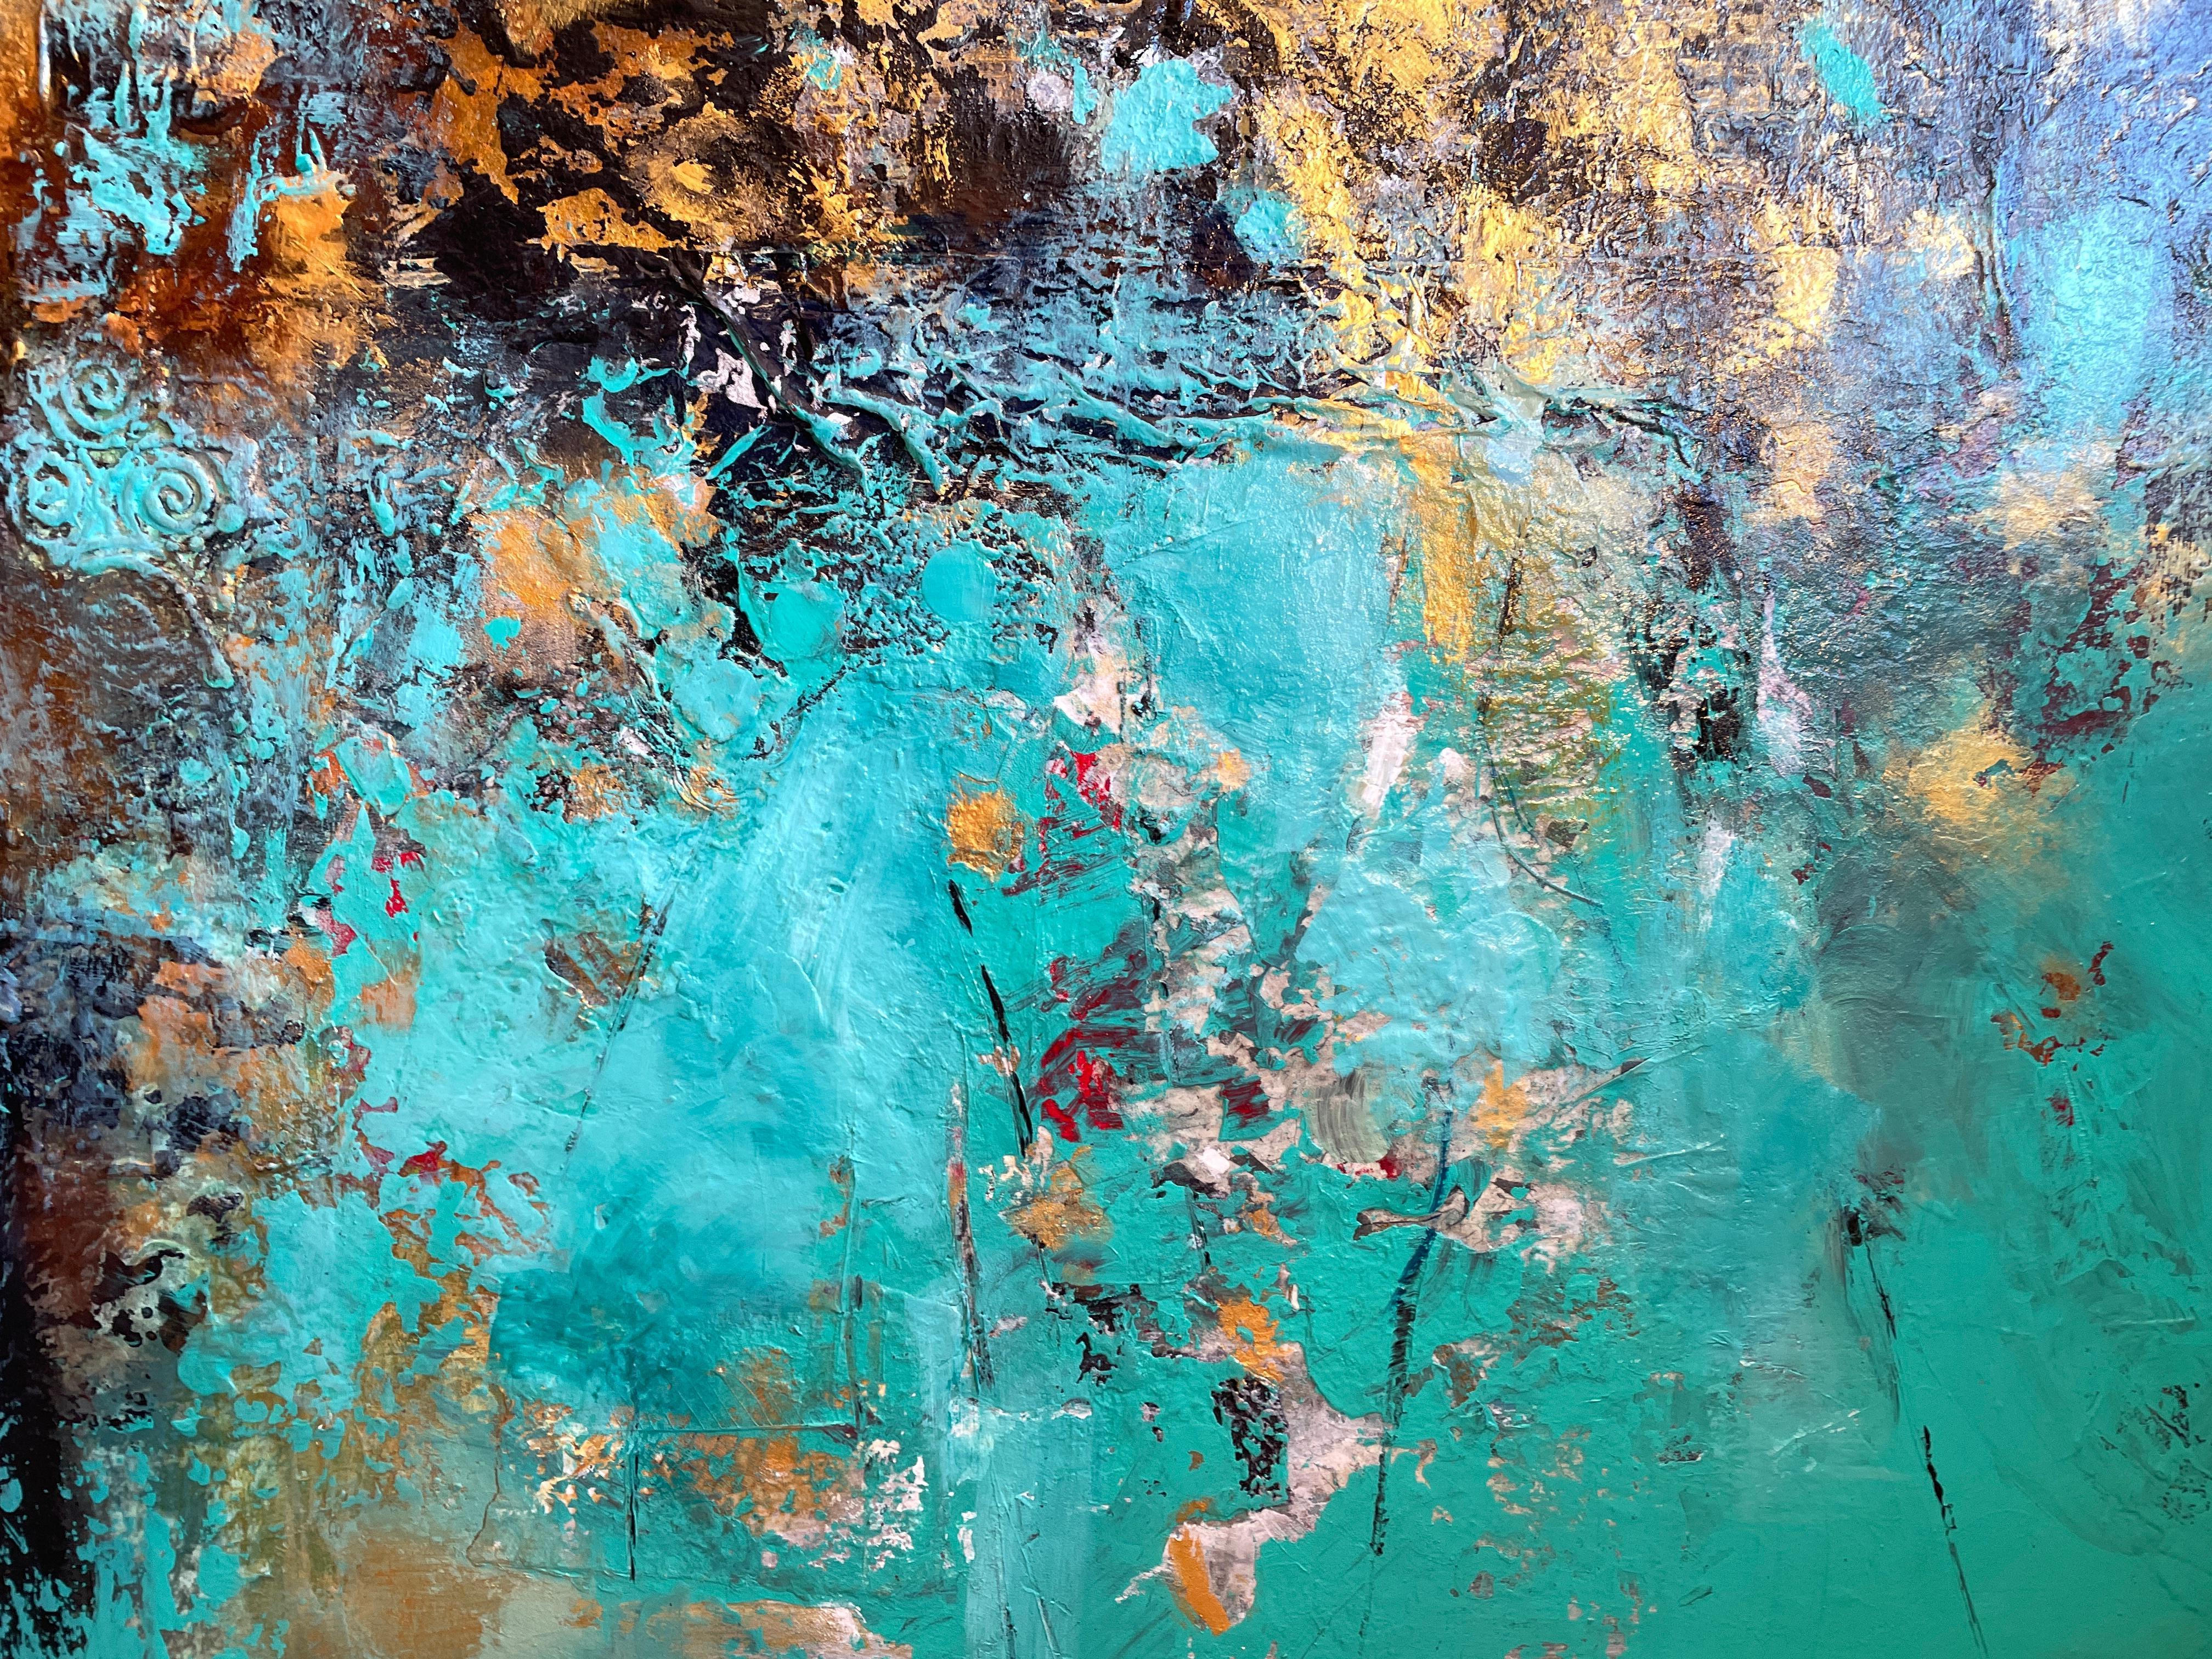 'Full Circle' by Mary Titus - Vibrant Teal and Gold Abstract Expressionist 3